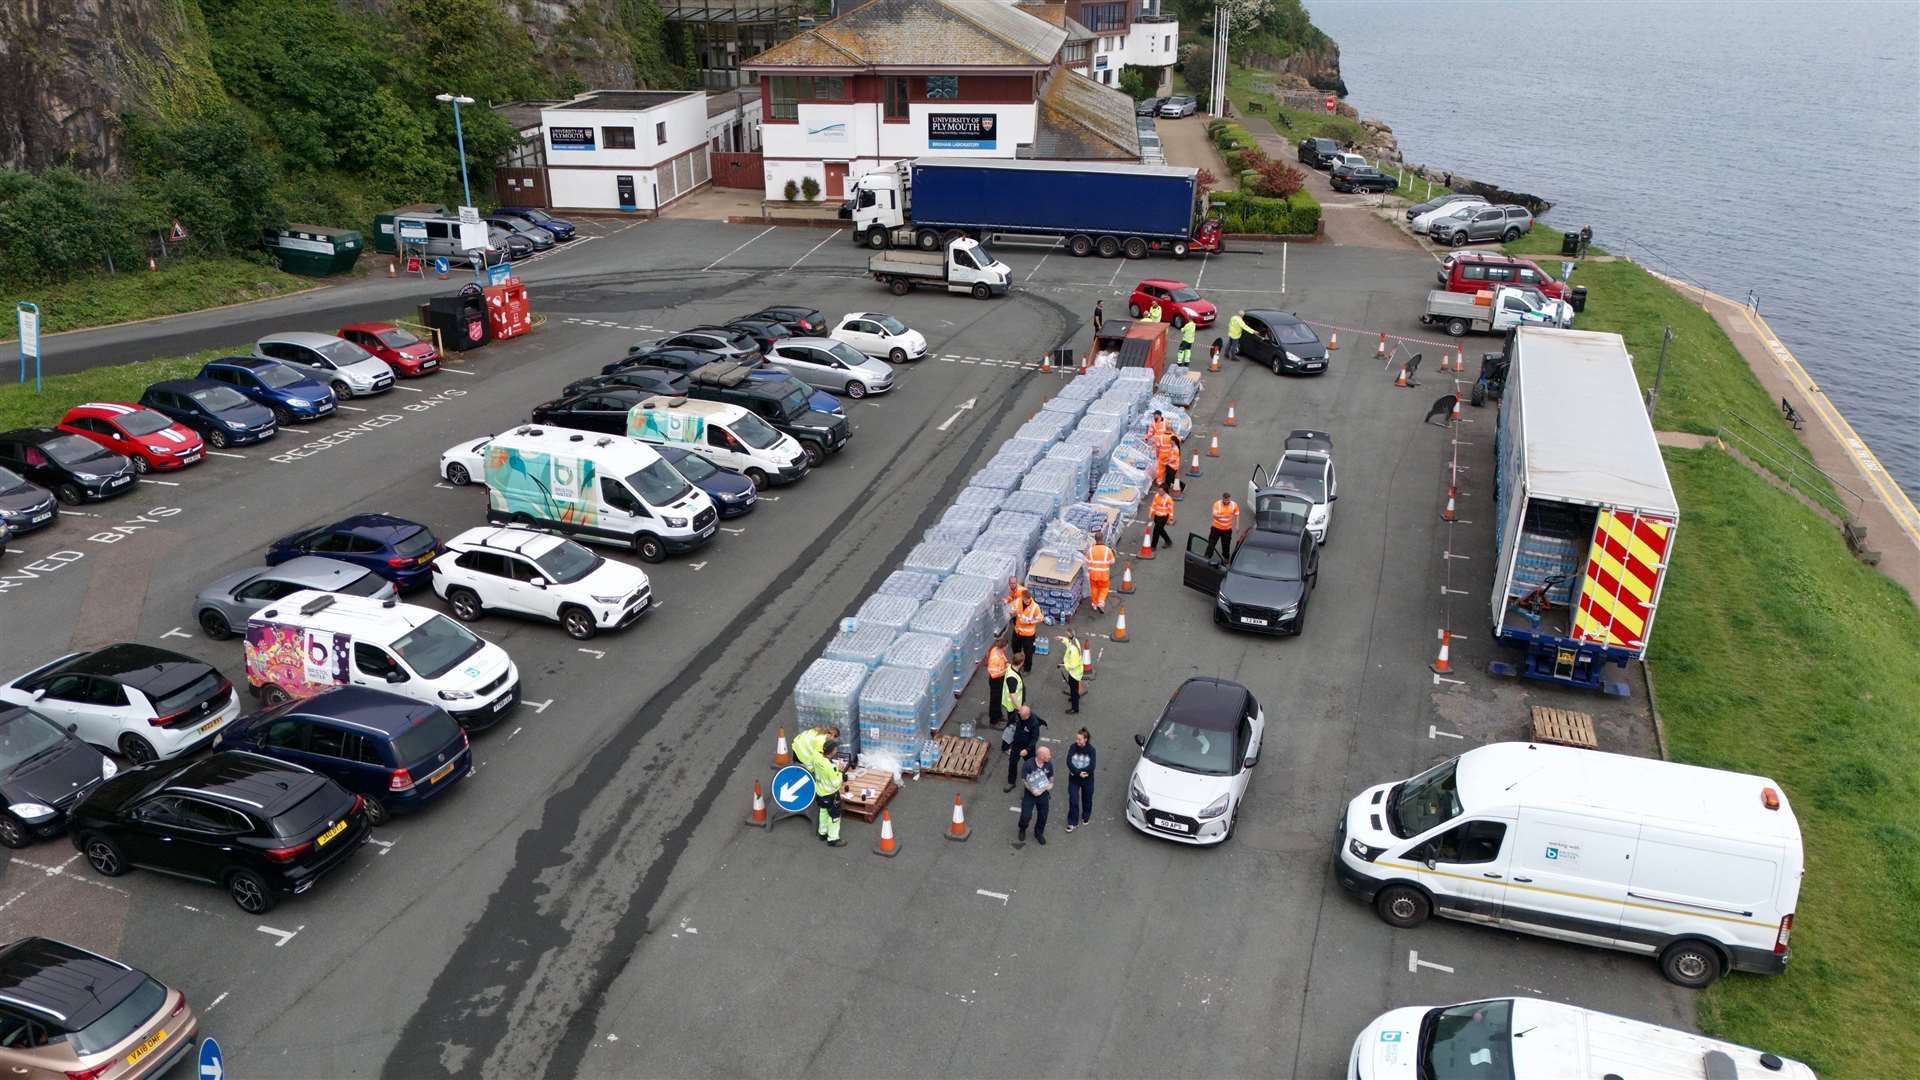 Bottled water being picked up at Freshwater car park in Brixham (Ben Birchall/PA)